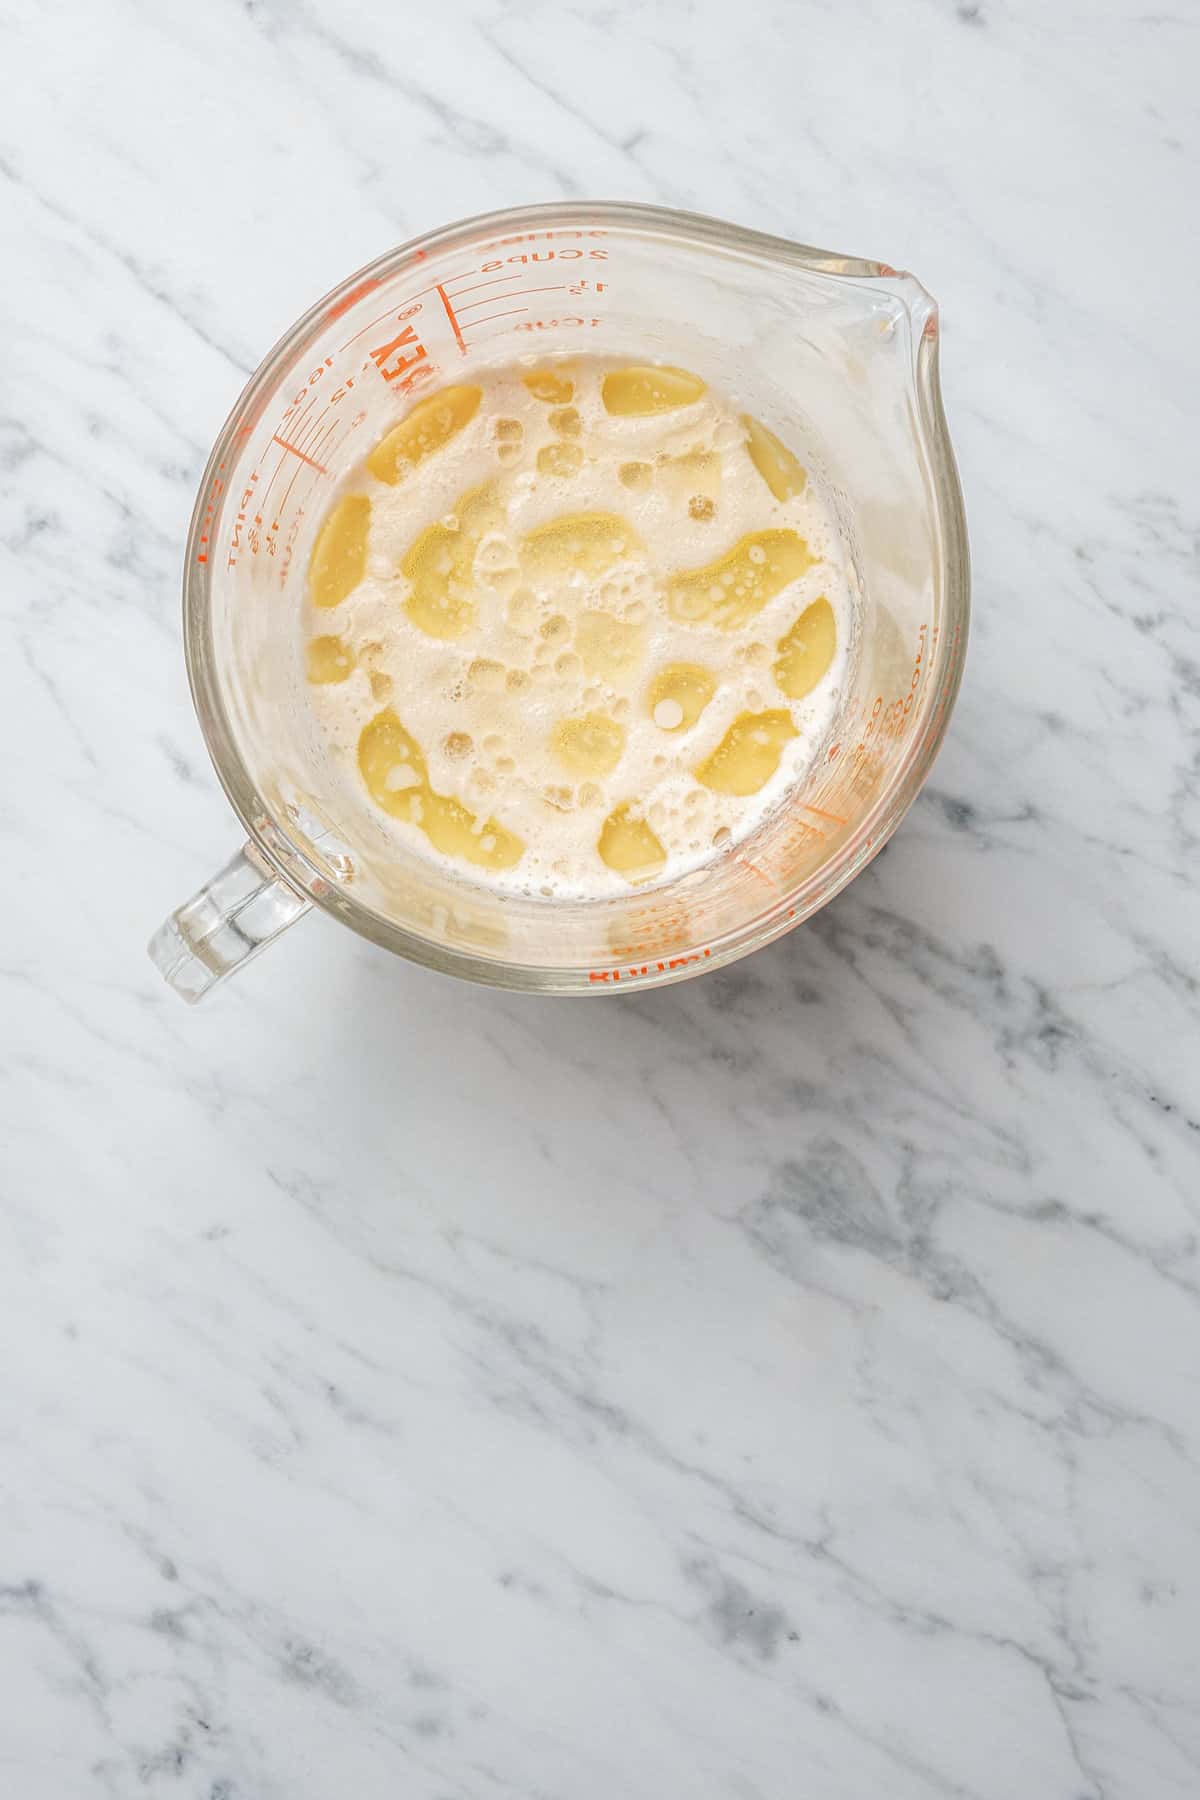 Milk combined with yeast and melted butter in a glass measuring cup.